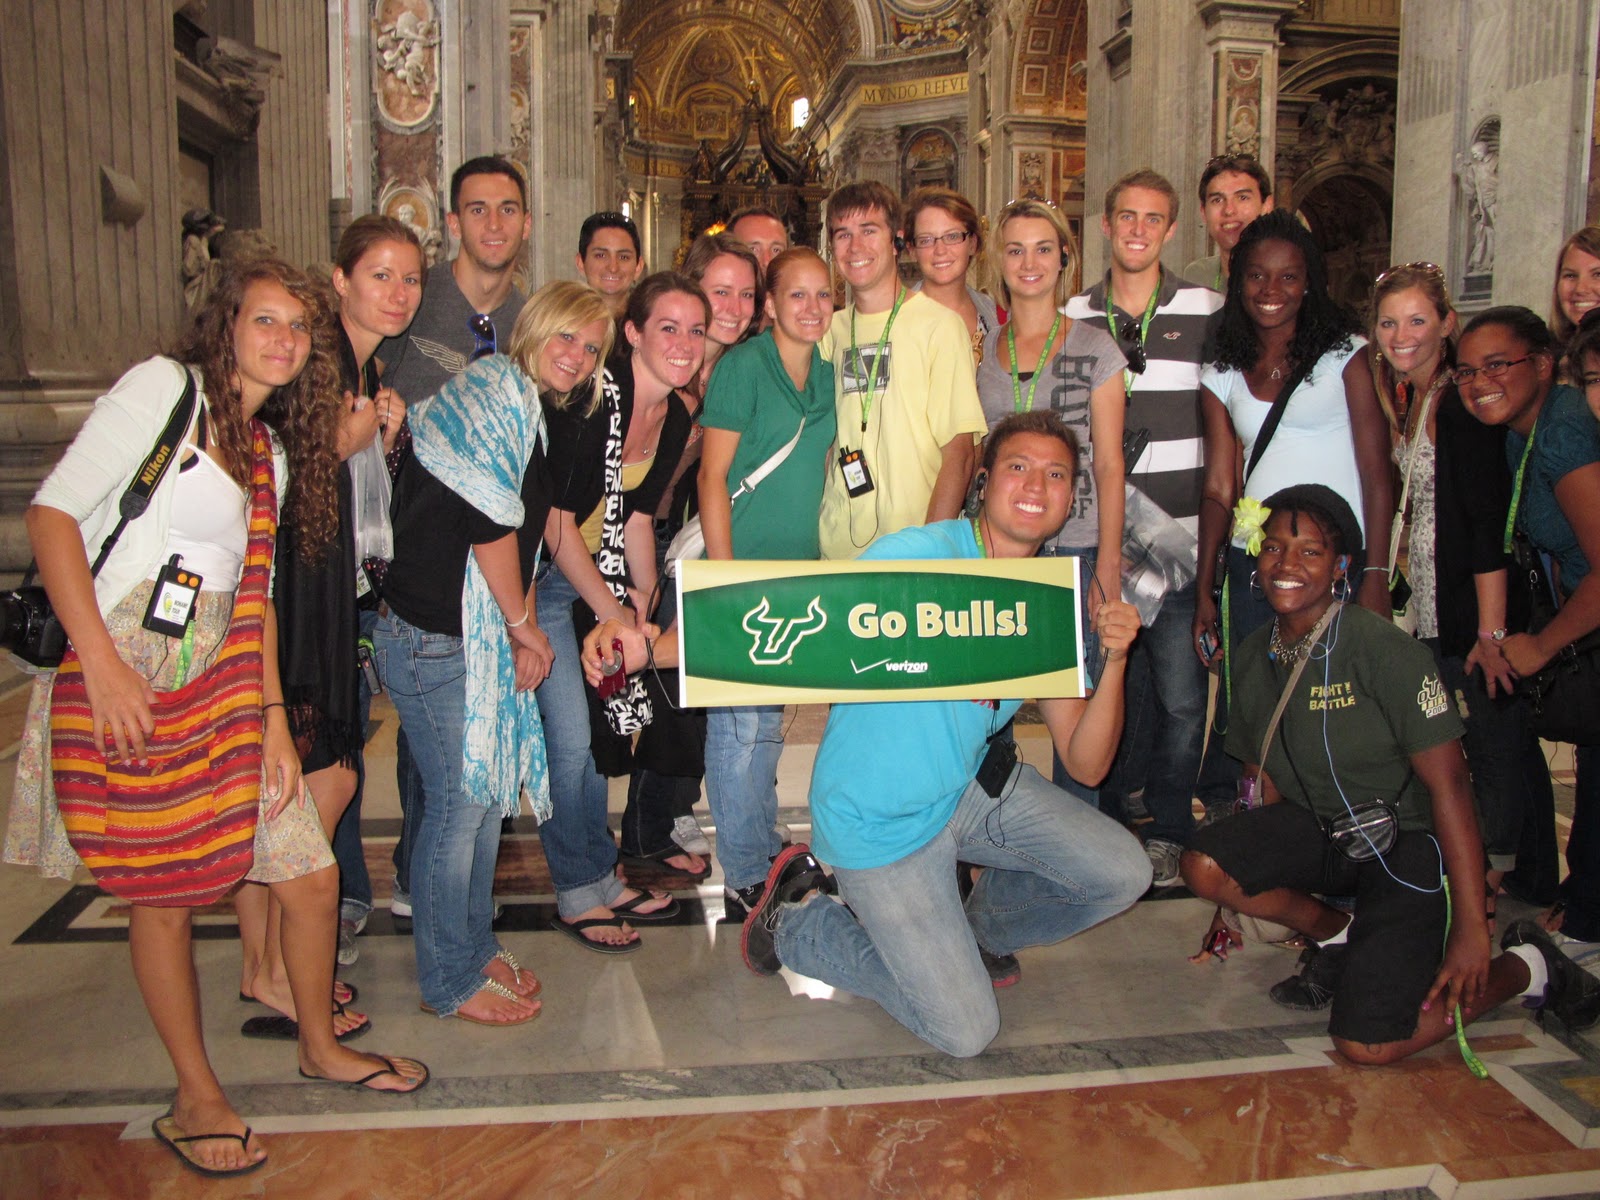 DR. MERRICK'S WEBSITE FOR THE USF STUDY ABROAD PROGRAM in FLORENCE